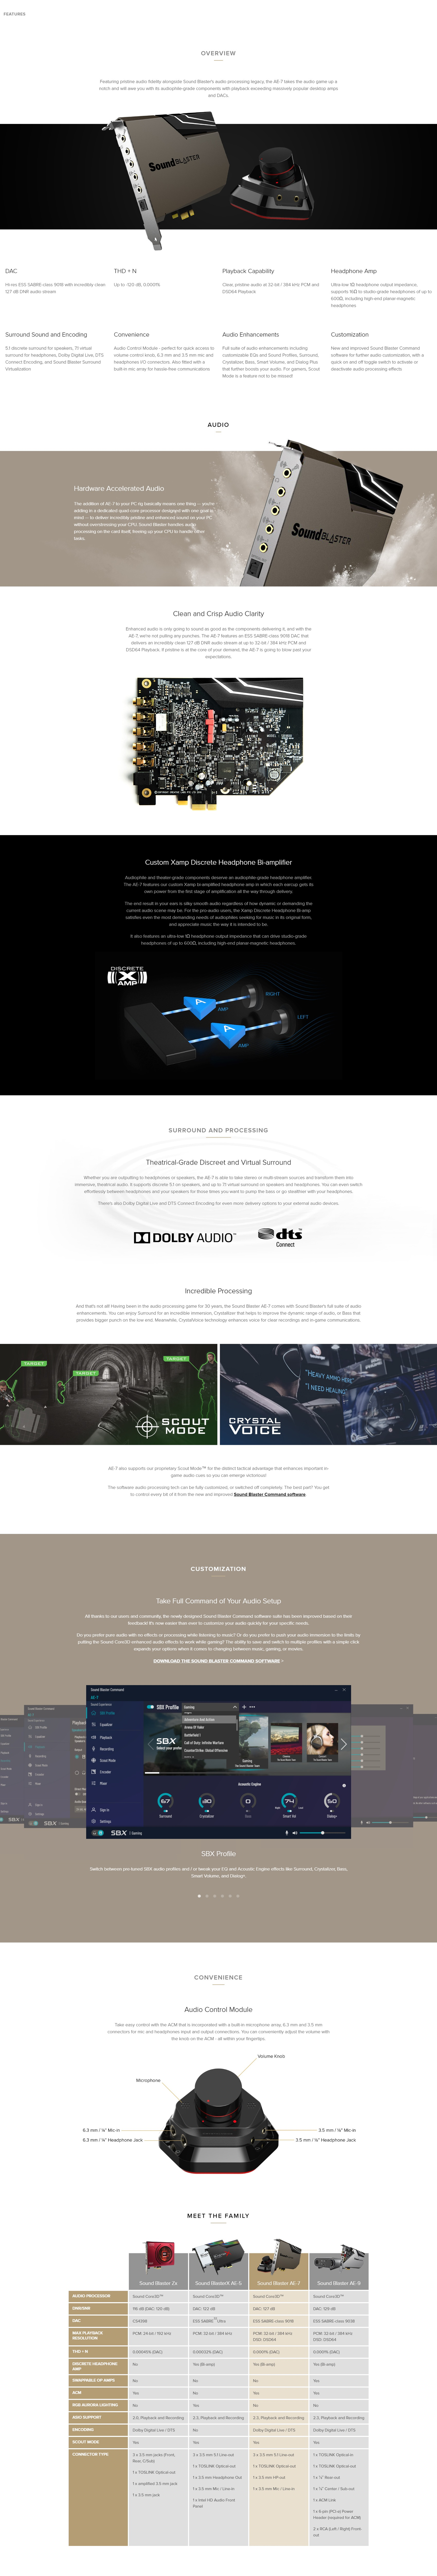 A large marketing image providing additional information about the product Creative Sound Blaster AE-7 Hi-Res PCI-e Dac and Amp Sound Card  - Additional alt info not provided